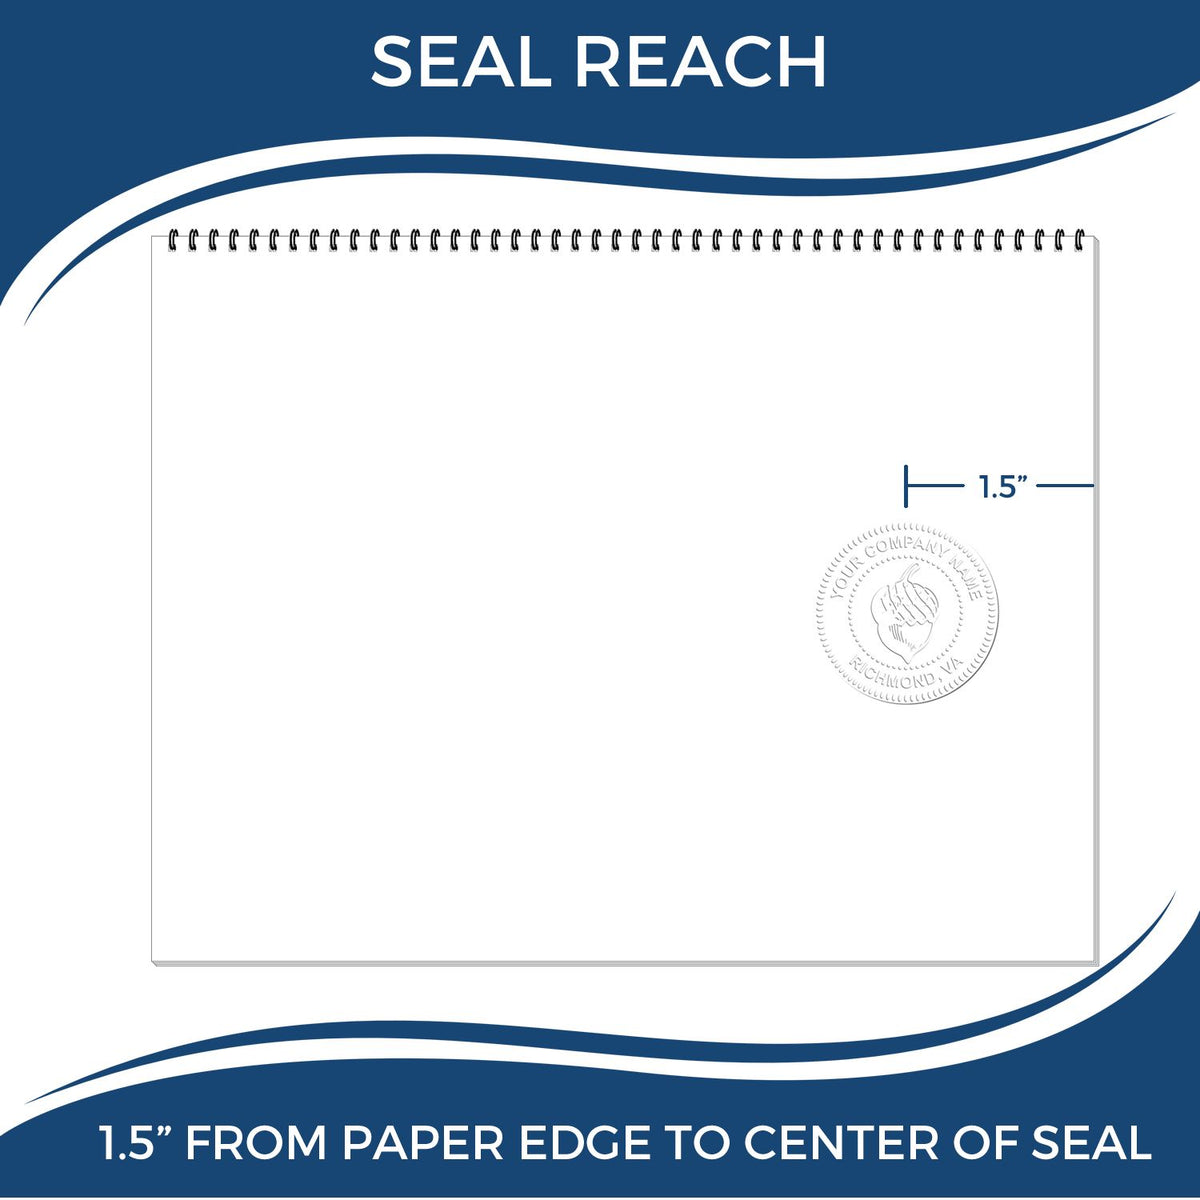 An infographic showing the seal reach which is represented by a ruler and a miniature seal image of the Soft Utah Professional Engineer Seal